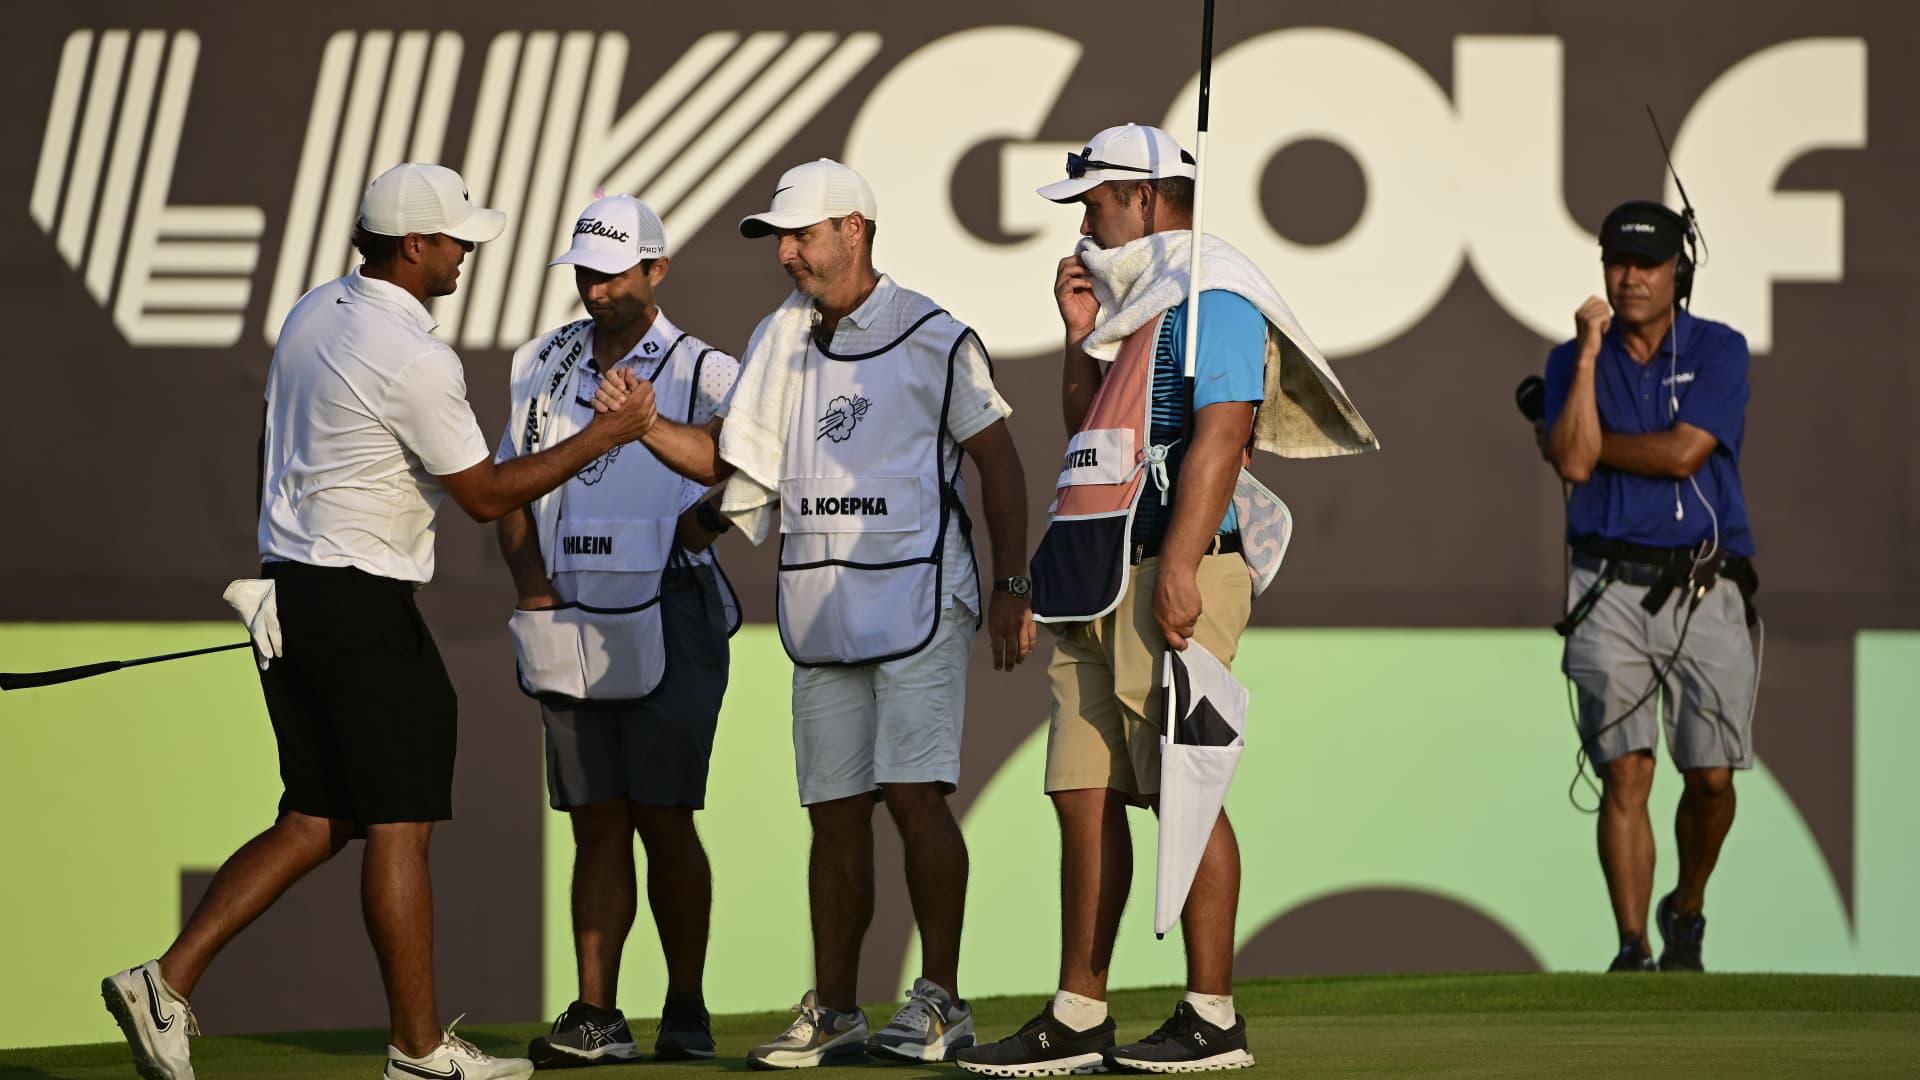 Team Captain Brooks Koepka of Smash GC and caddie Ricky Elliott shake hands on the 18th green during day three of the LIV Golf Invitational - Jeddah at Royal Greens Golf & Country Club on October 16, 2022 in King Abdullah Economic City, Saudi Arabia.